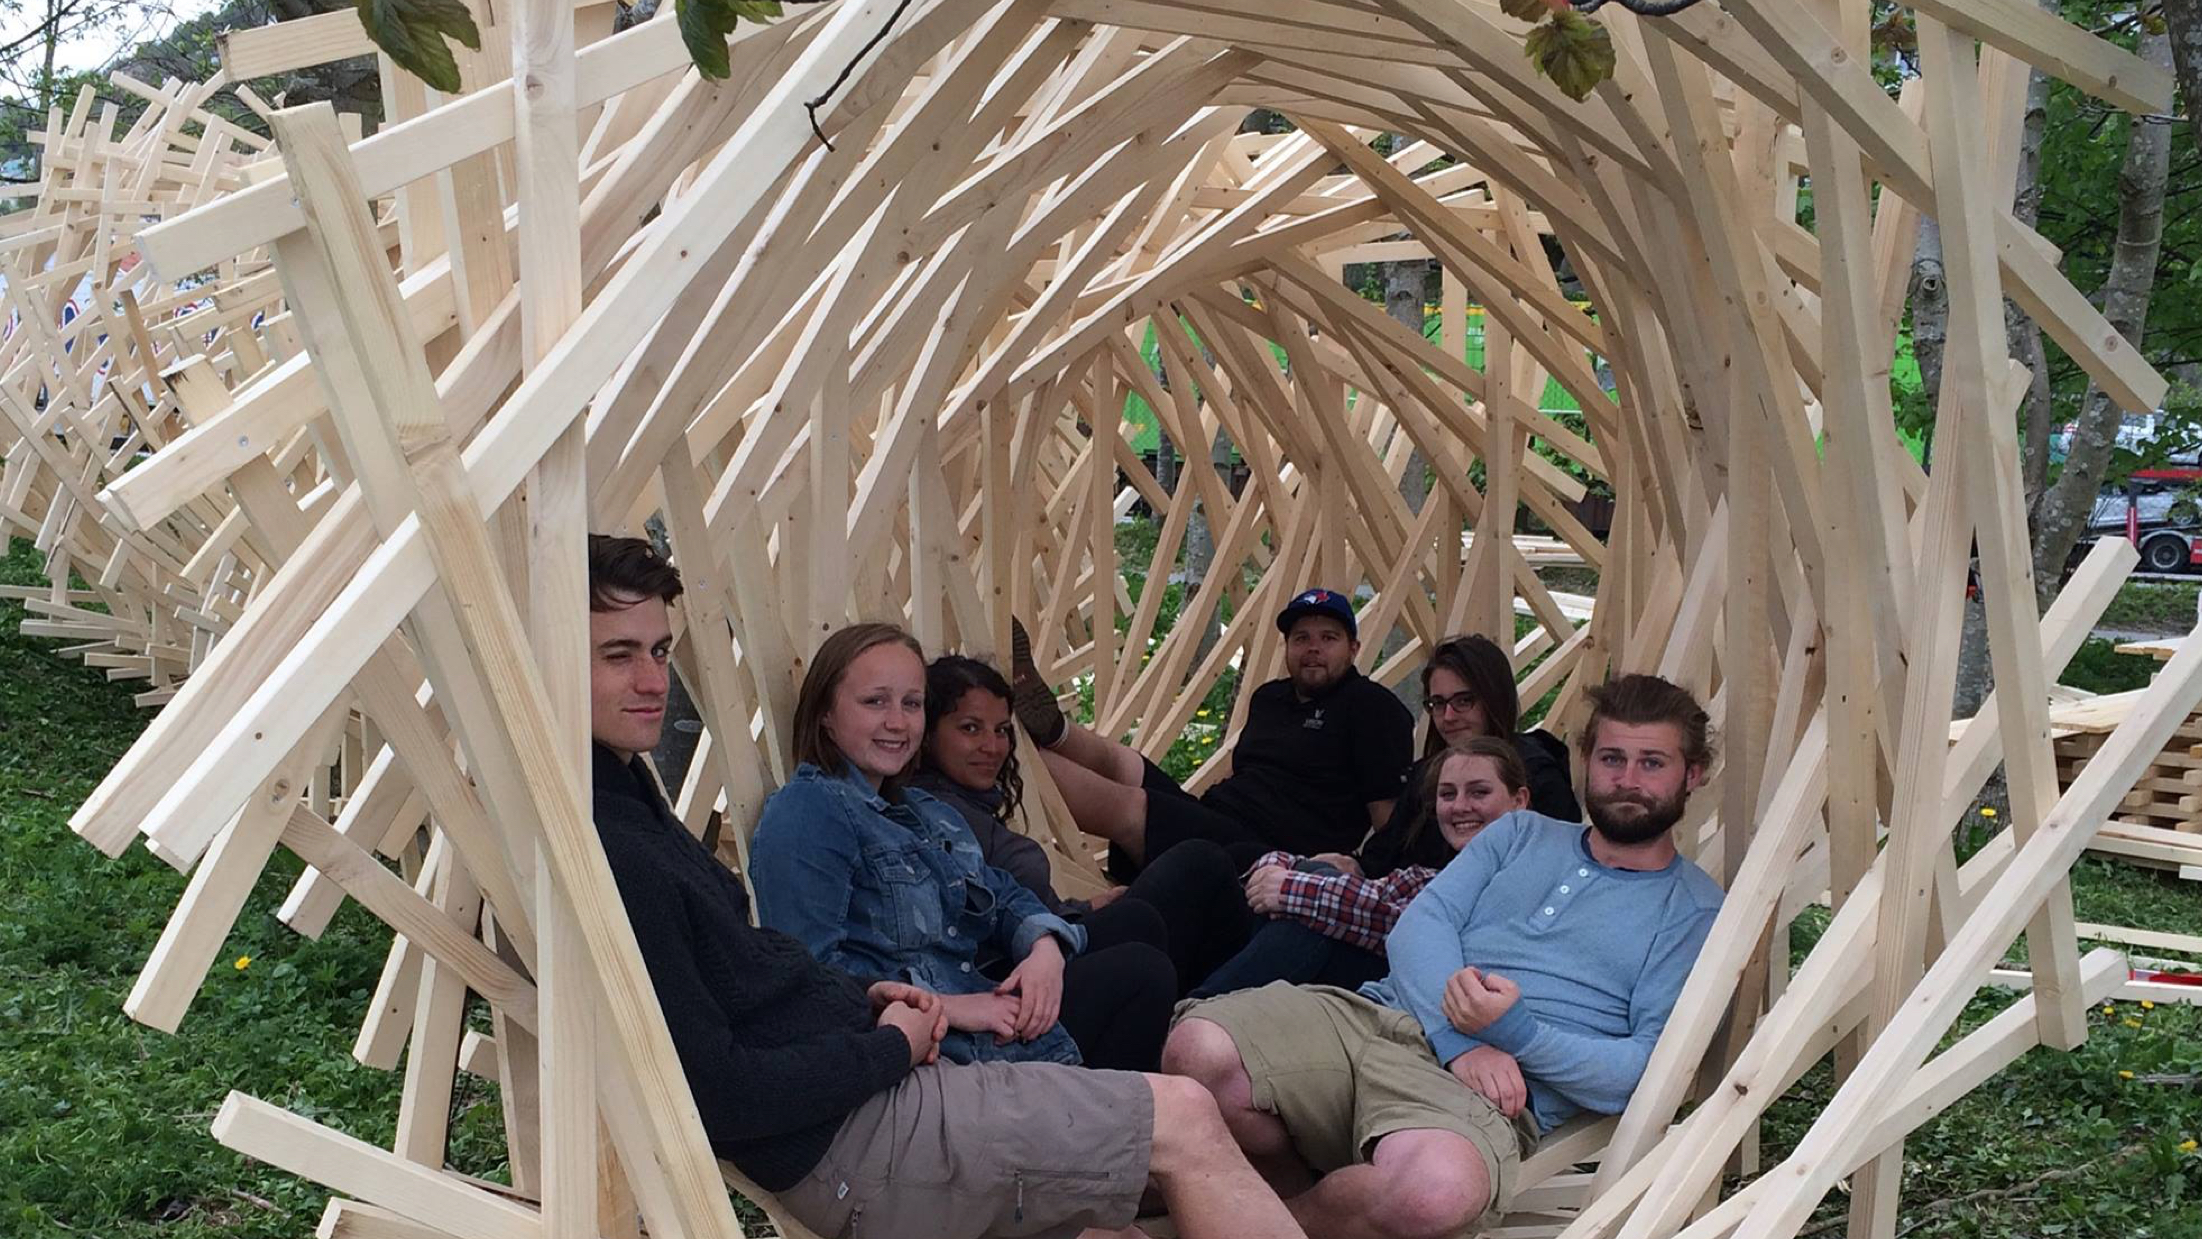 Photograph of a group of students sitting in a wooden arch structure they designed